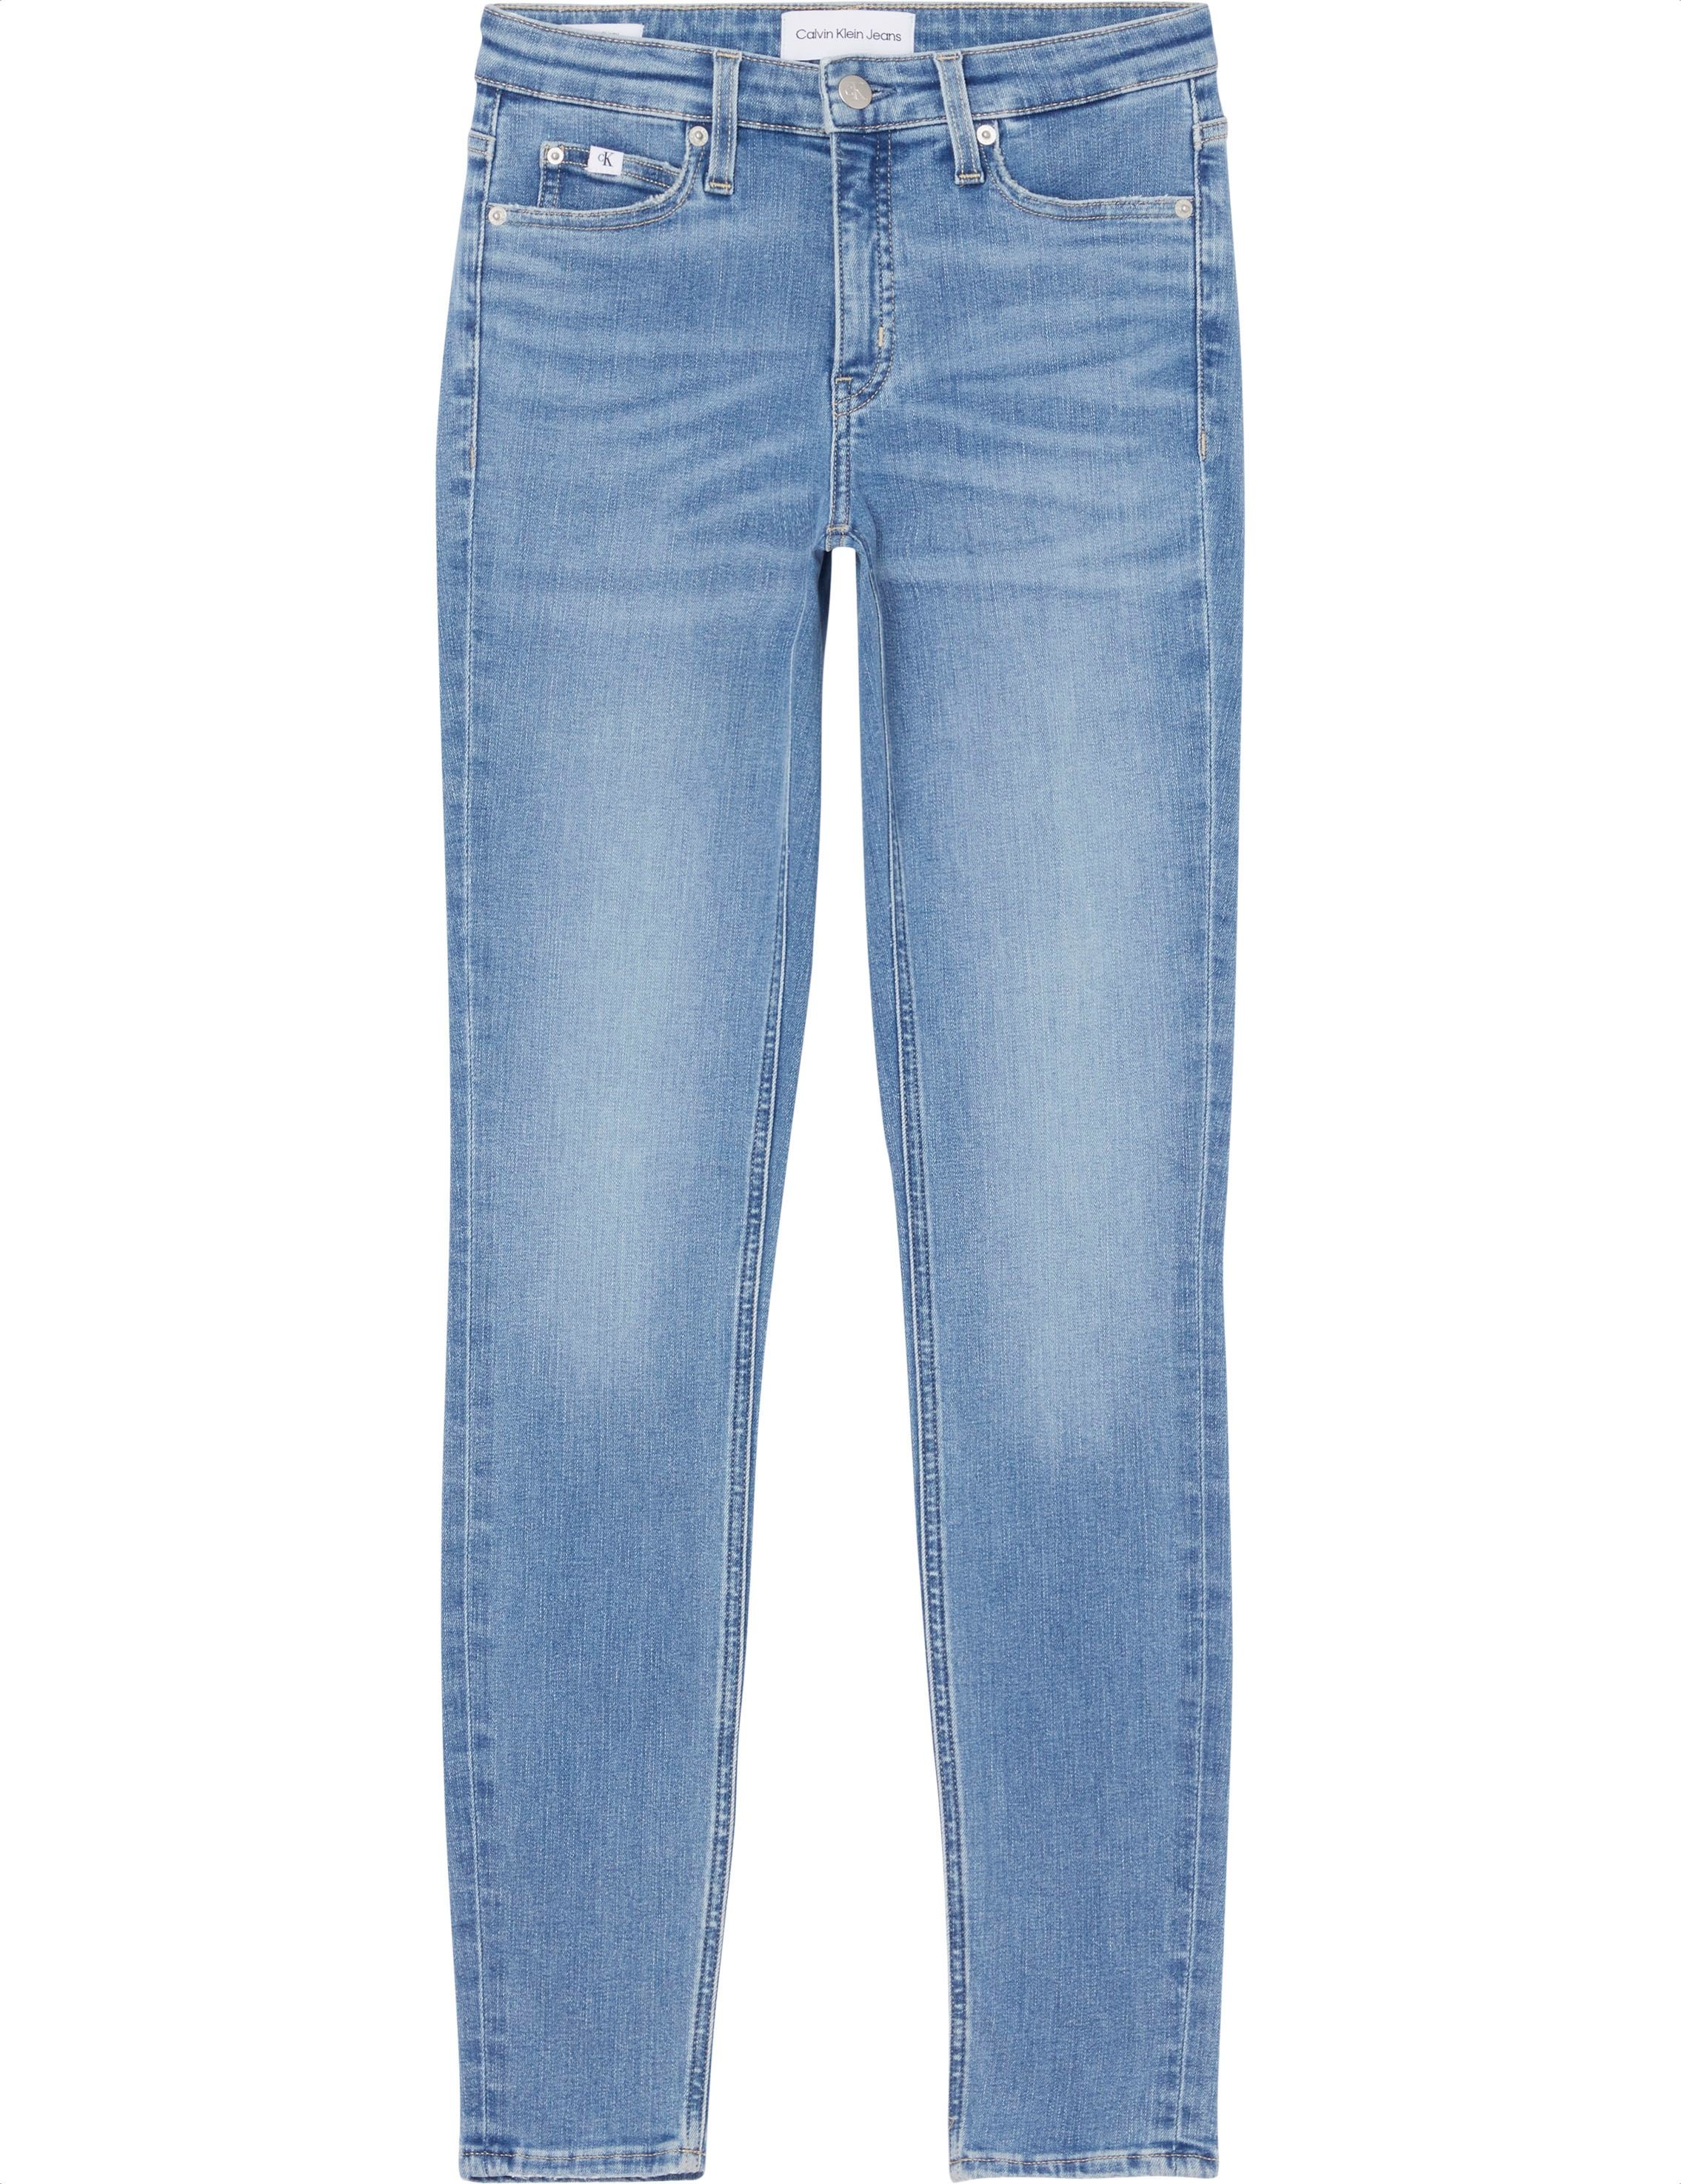 Calvin Klein Jeans Skinny-fit-Jeans, online bei im OTTO 5-Pocket-Style